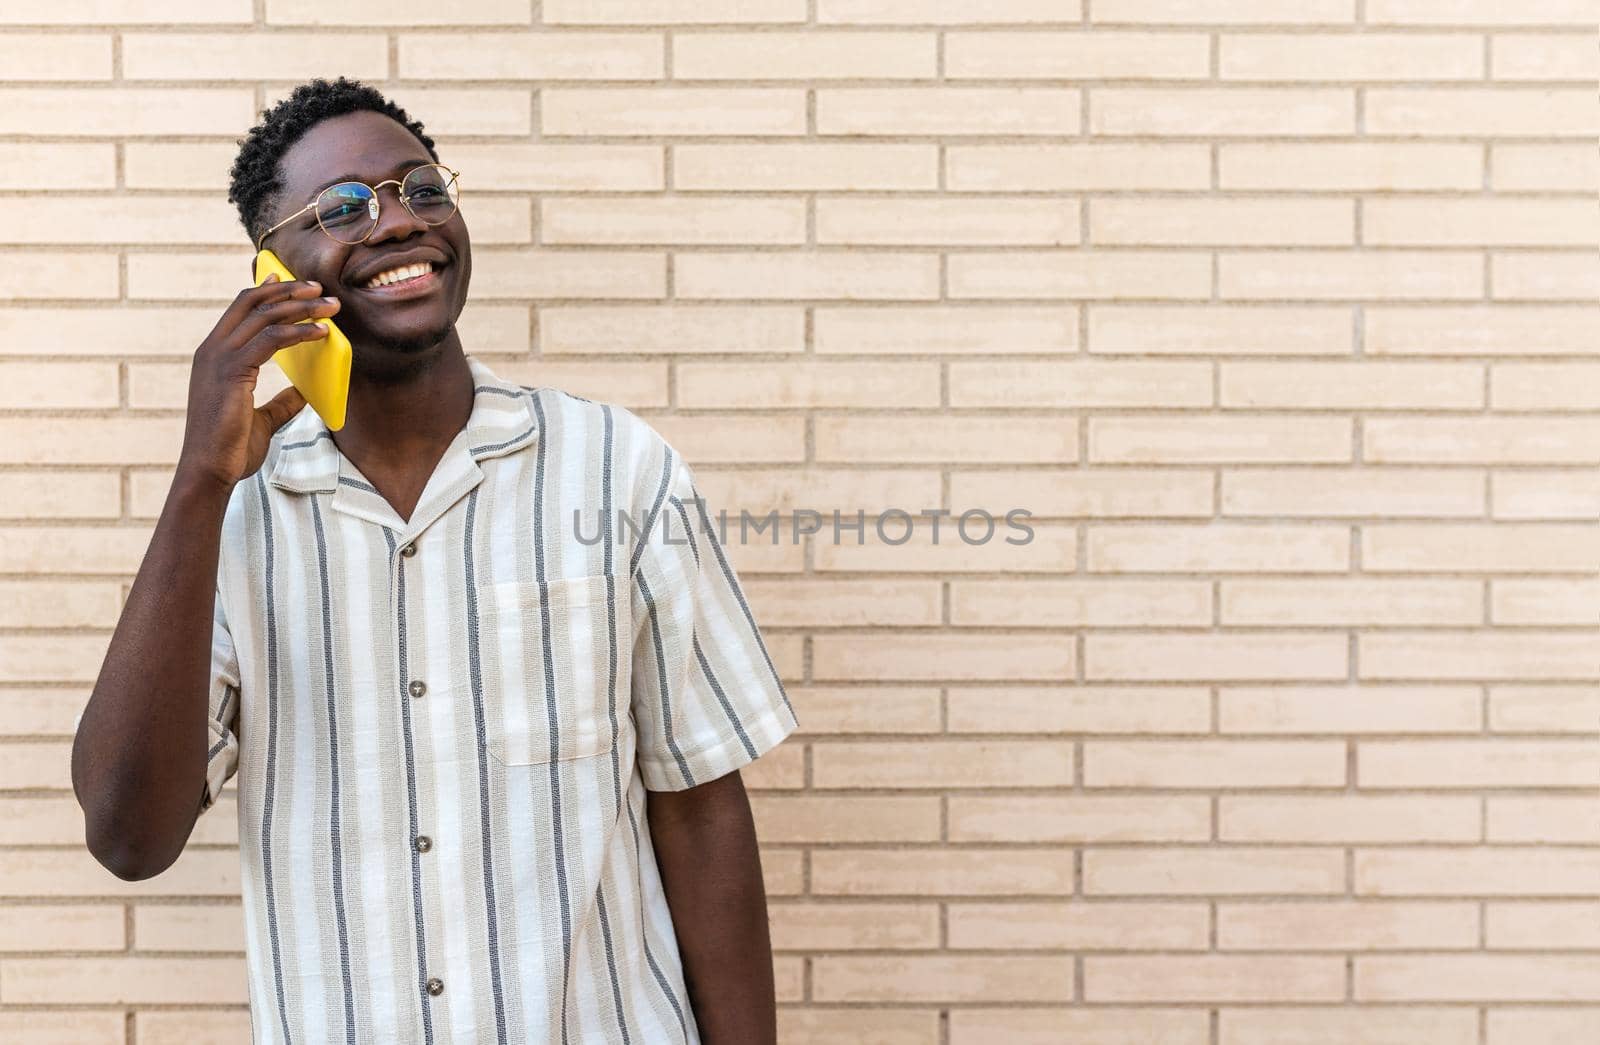 Smiling, happy African American man using mobile phone to talk. Black male on phone call in the street. Brick wall background. Copy space. Lifestyle and technology concept.